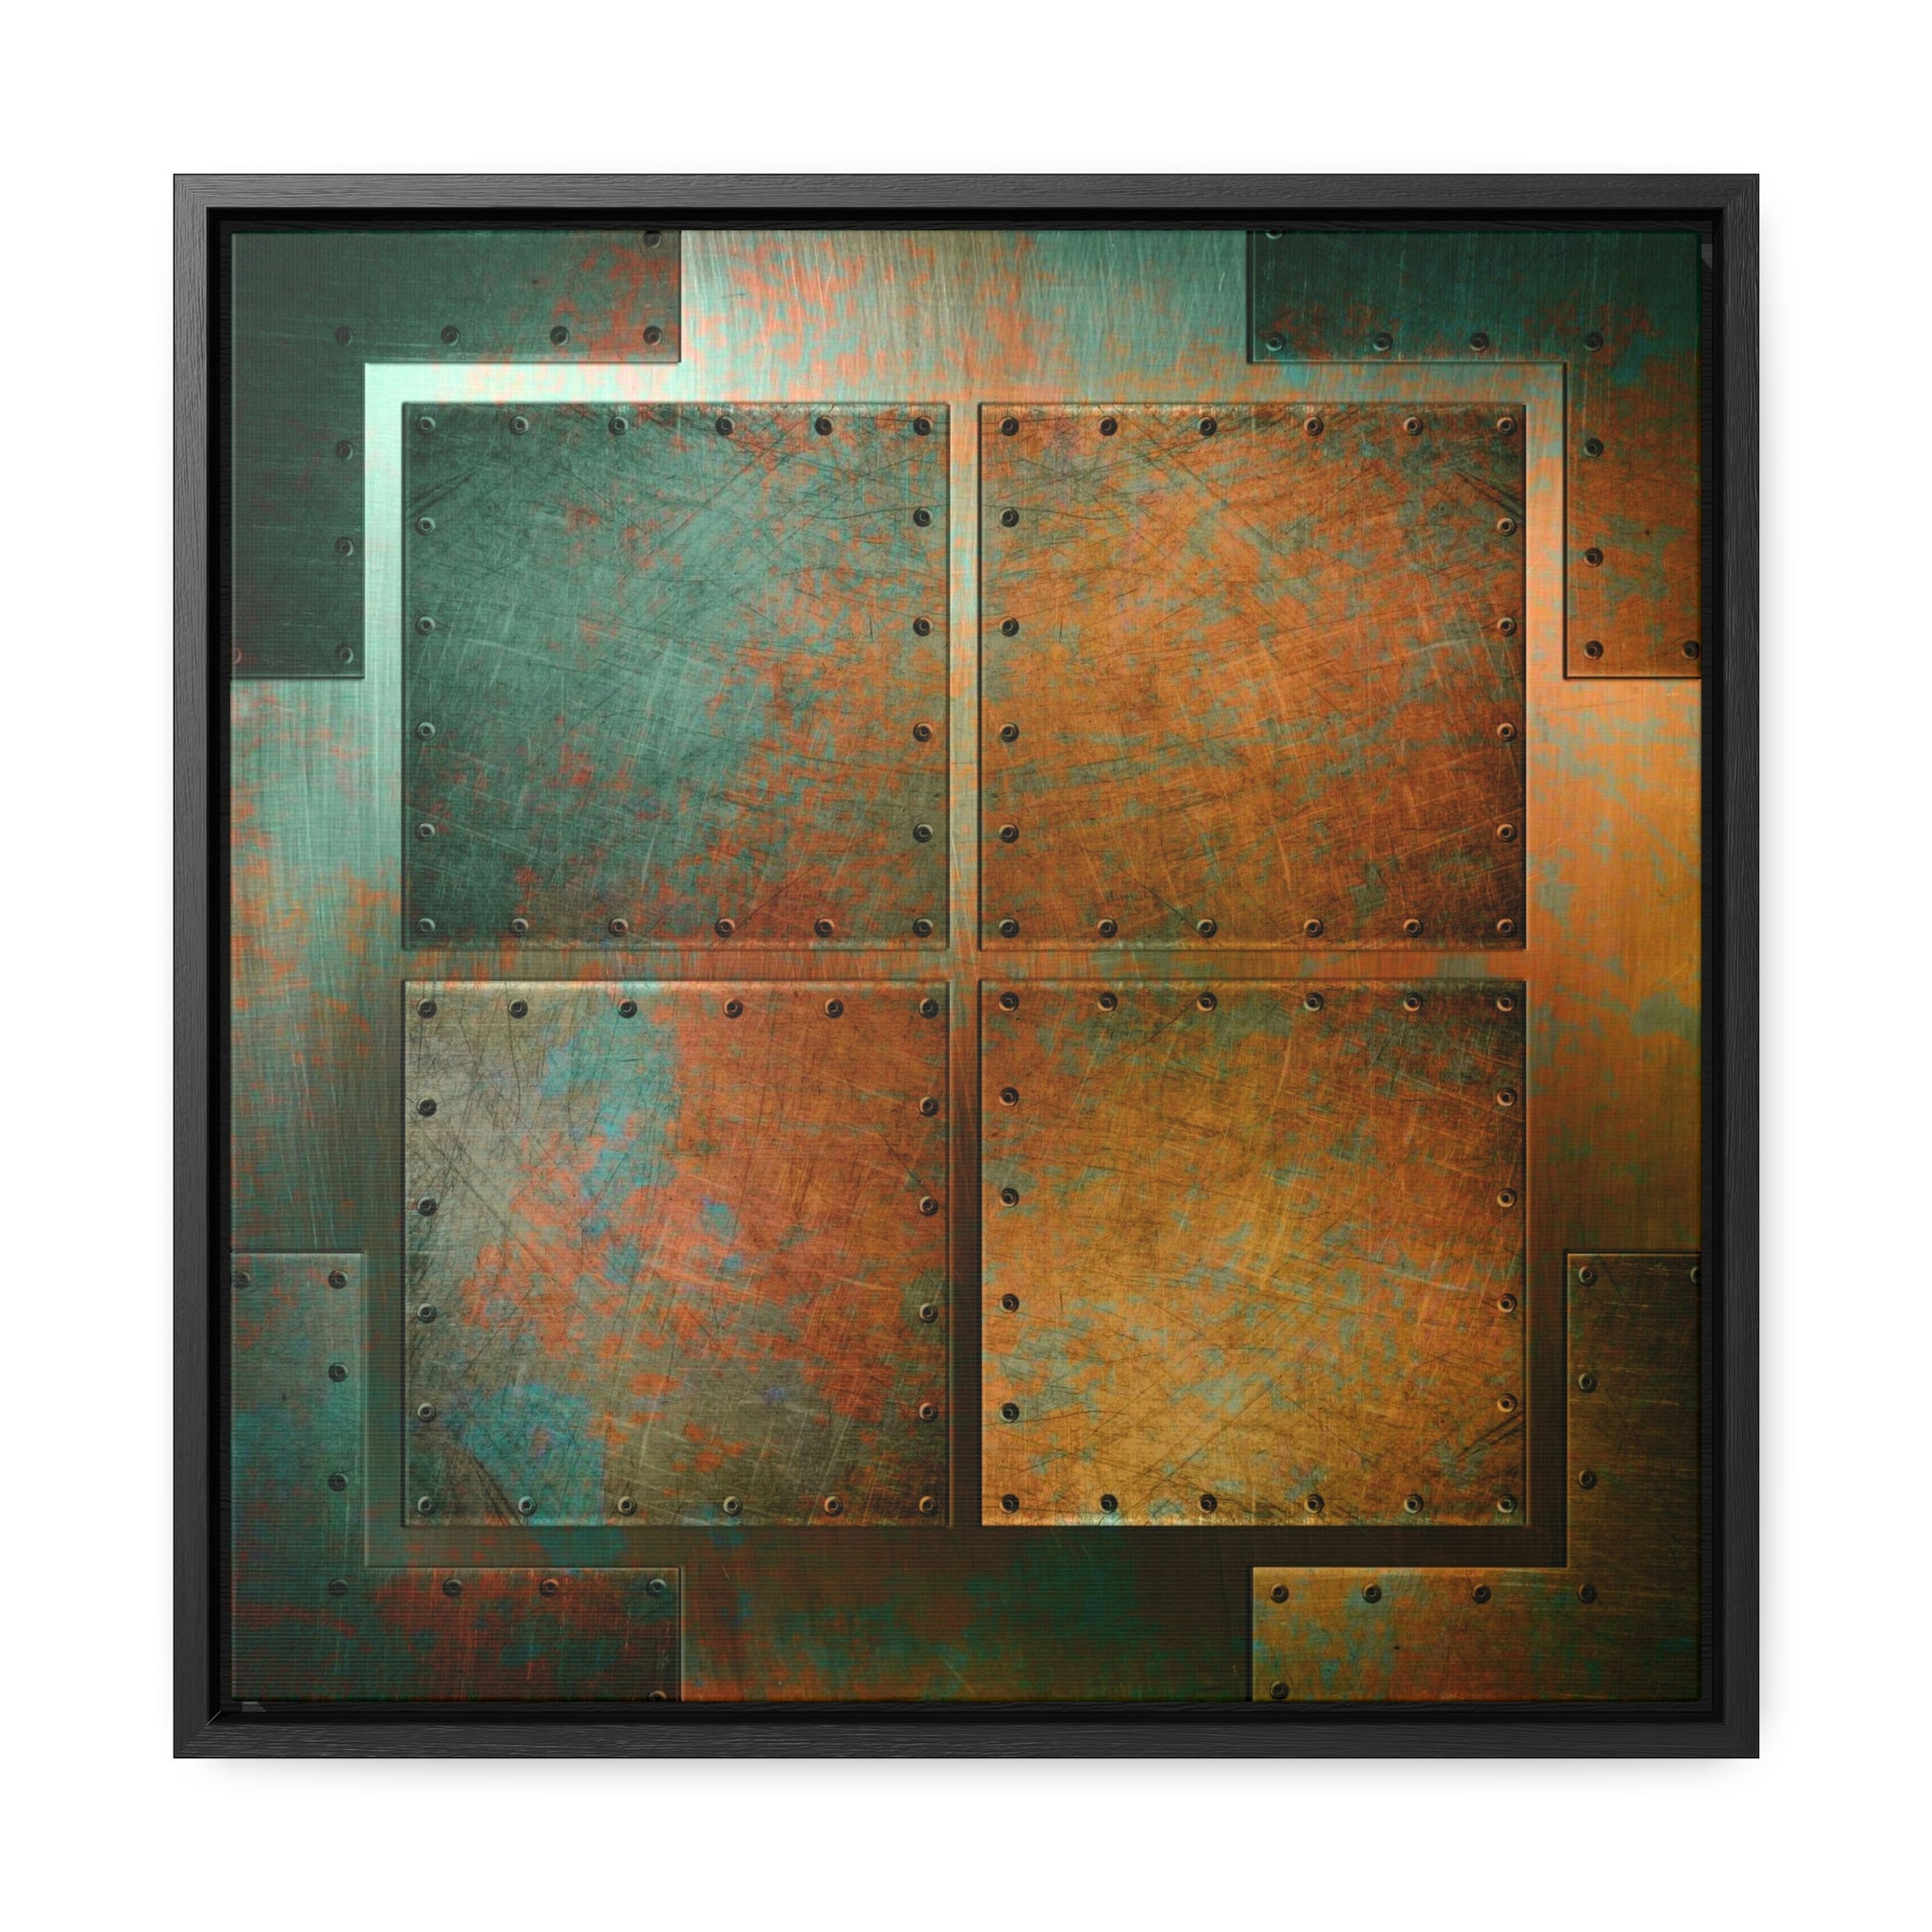 Steampunk Themed Wall Decor - Patinated, Riveted Copper Sheets Print on Canvas in a Floating Frame 5 sizes available